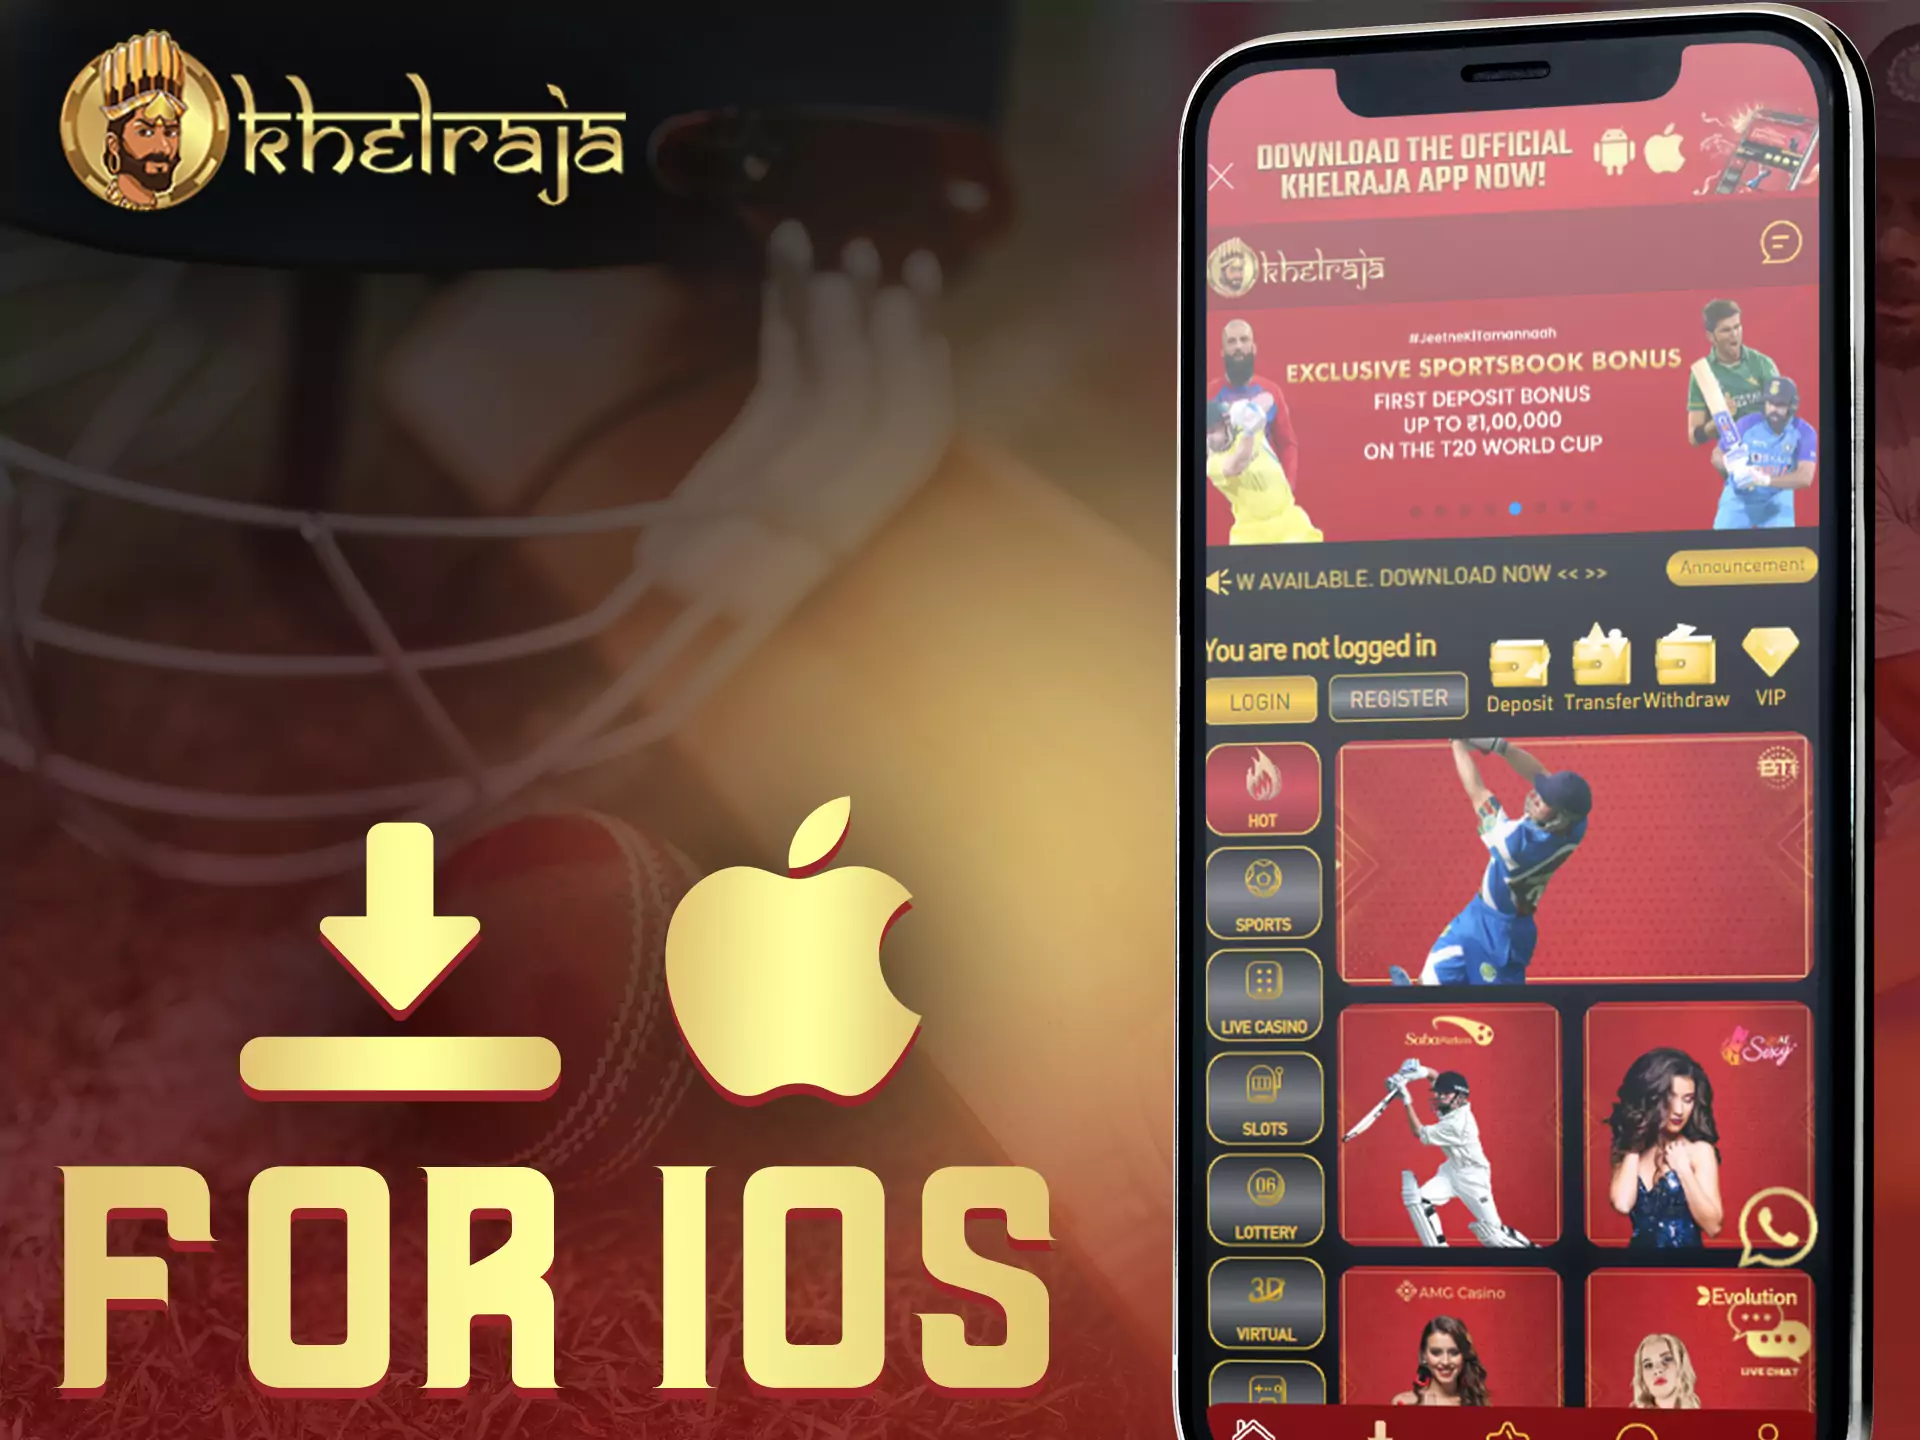 Install the Khelraja app to place bets or play casinos from your iOS device.